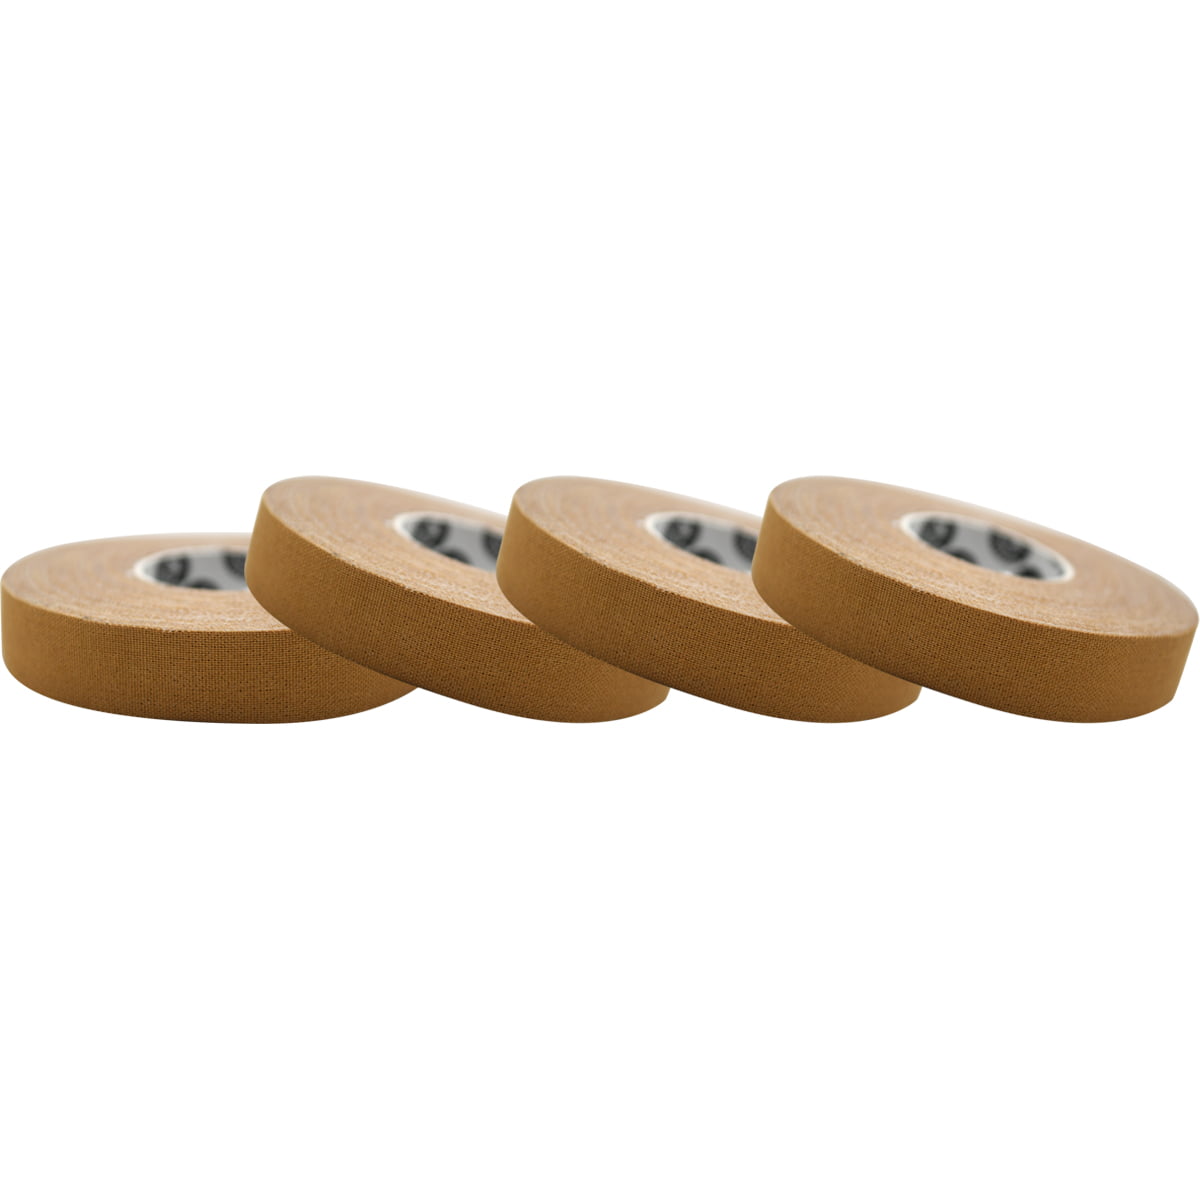 4-Pack (0.2 Inch Tape) – The Monkey Tape Co.